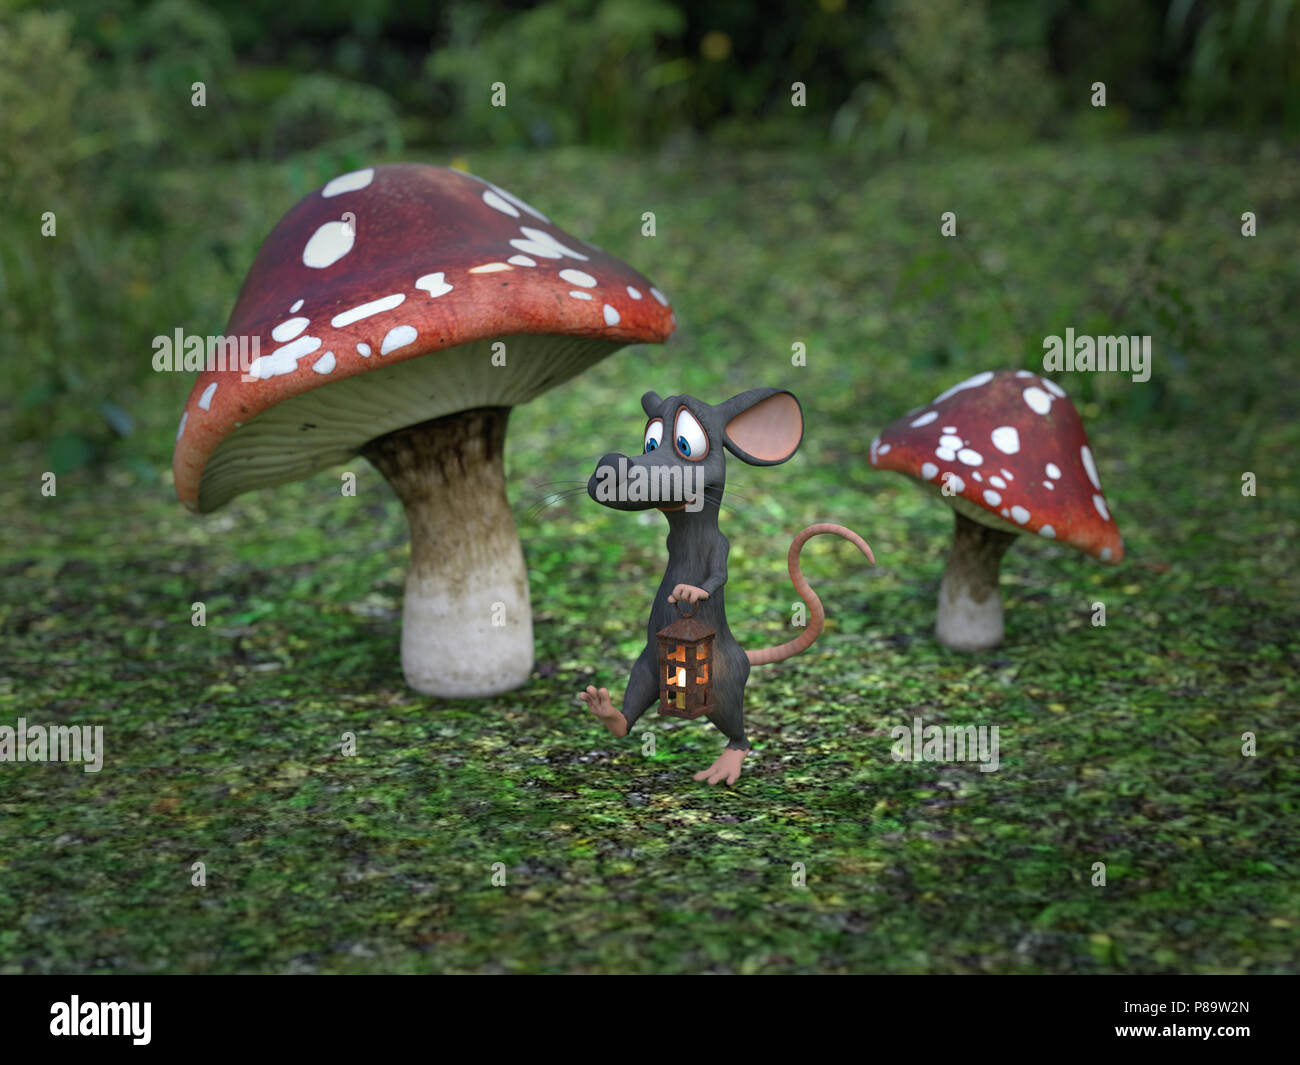 3D rendering of a cute smiling cartoon mouse walking at night with a lantern in a fairytale toadstool forest. Stock Photo